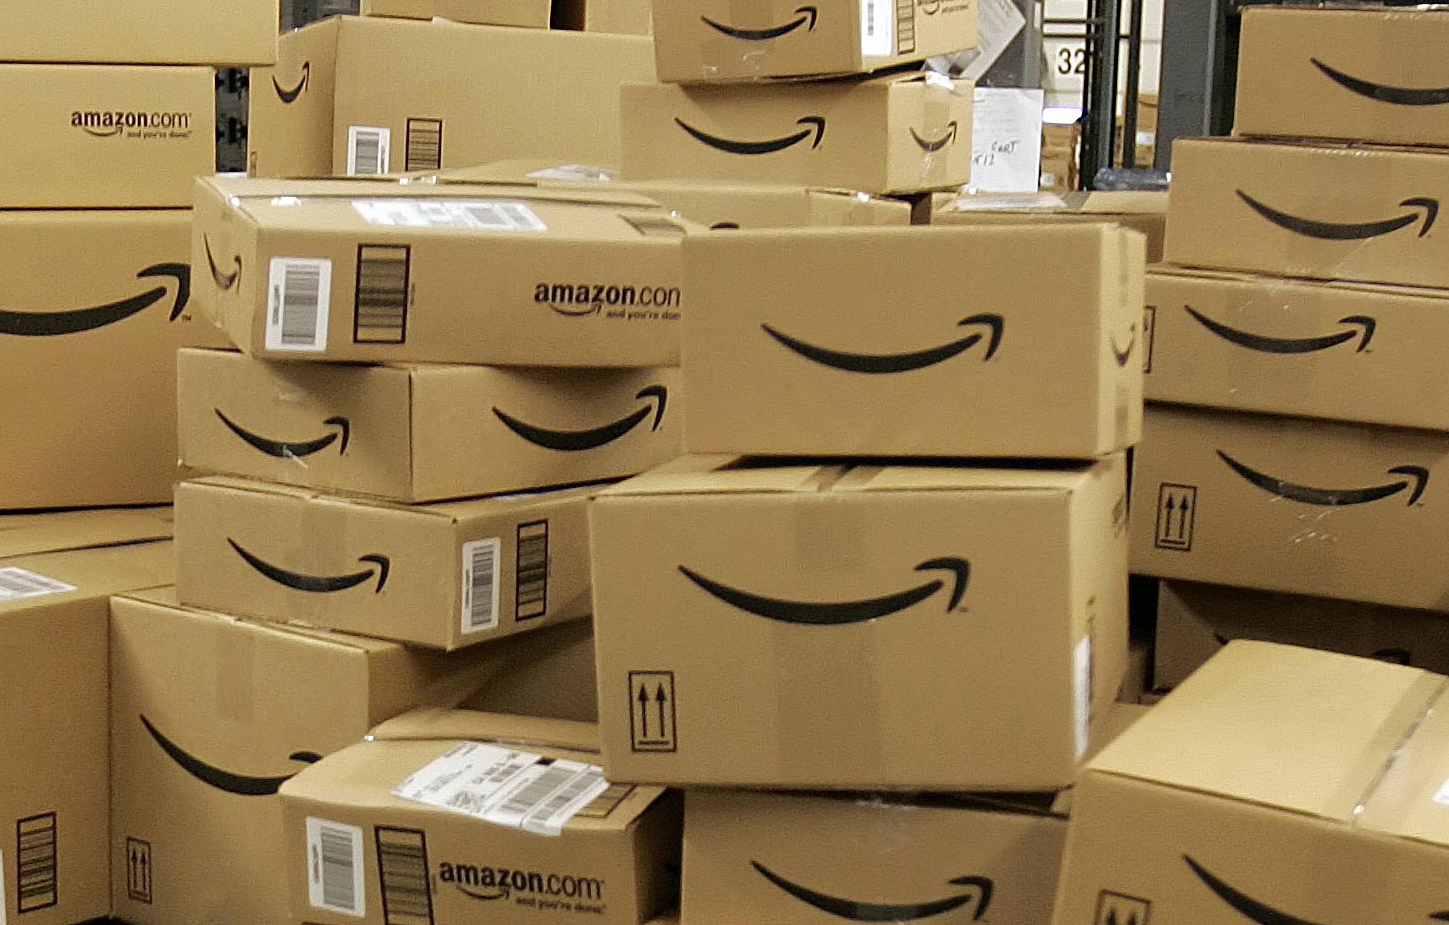 How an amazon review turns into a lawsuit